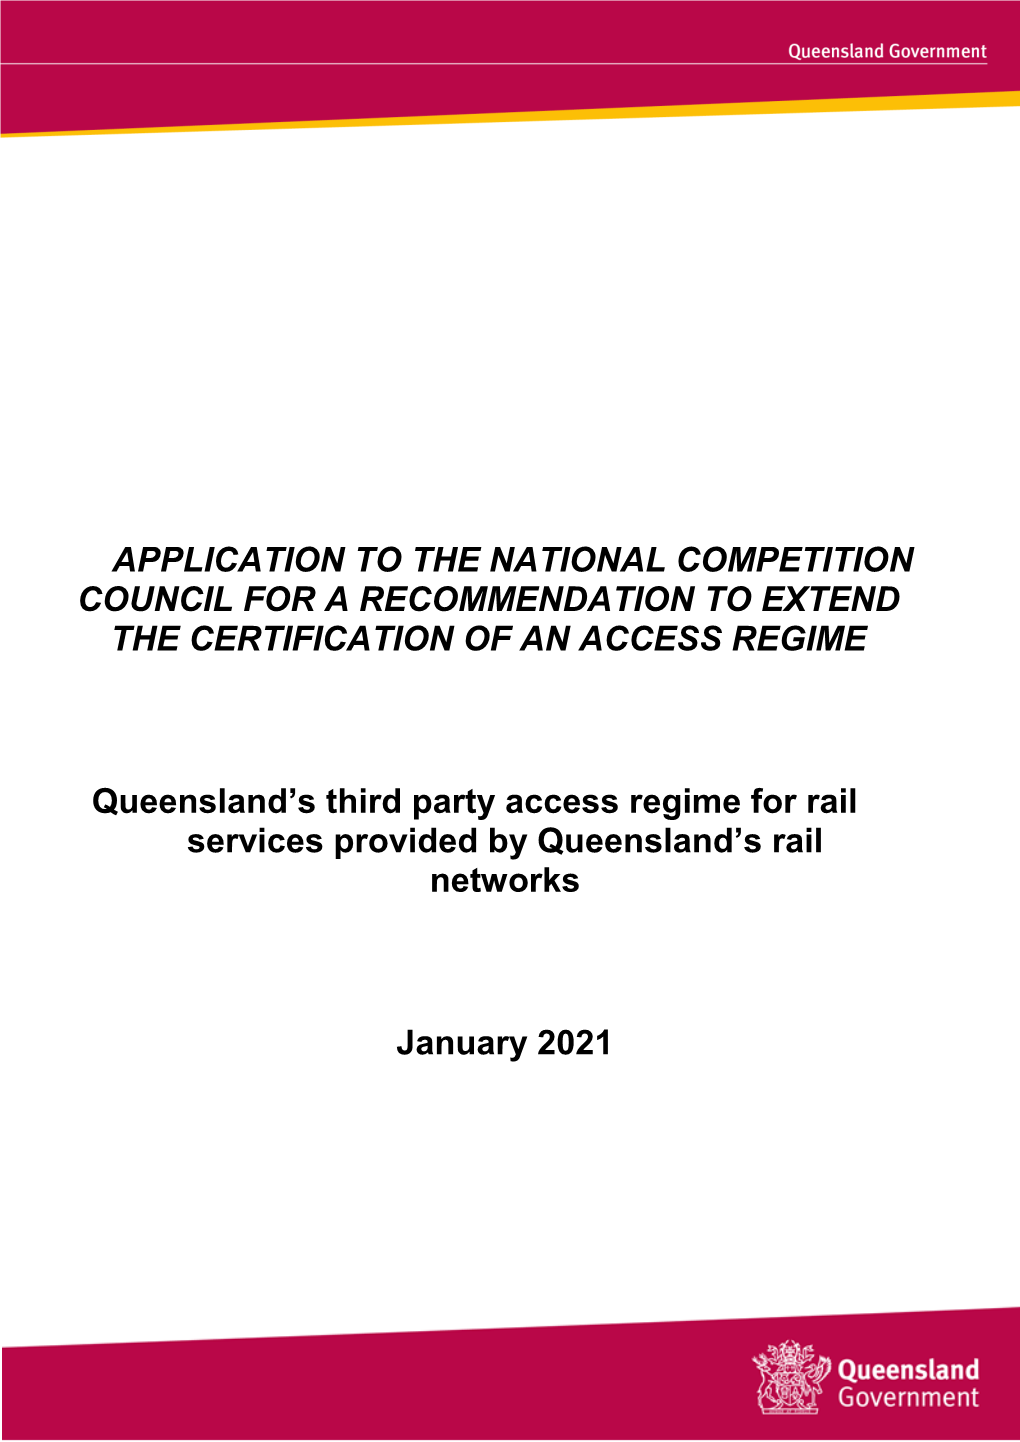 Application for Certification of the Queensland Rail Access Regime